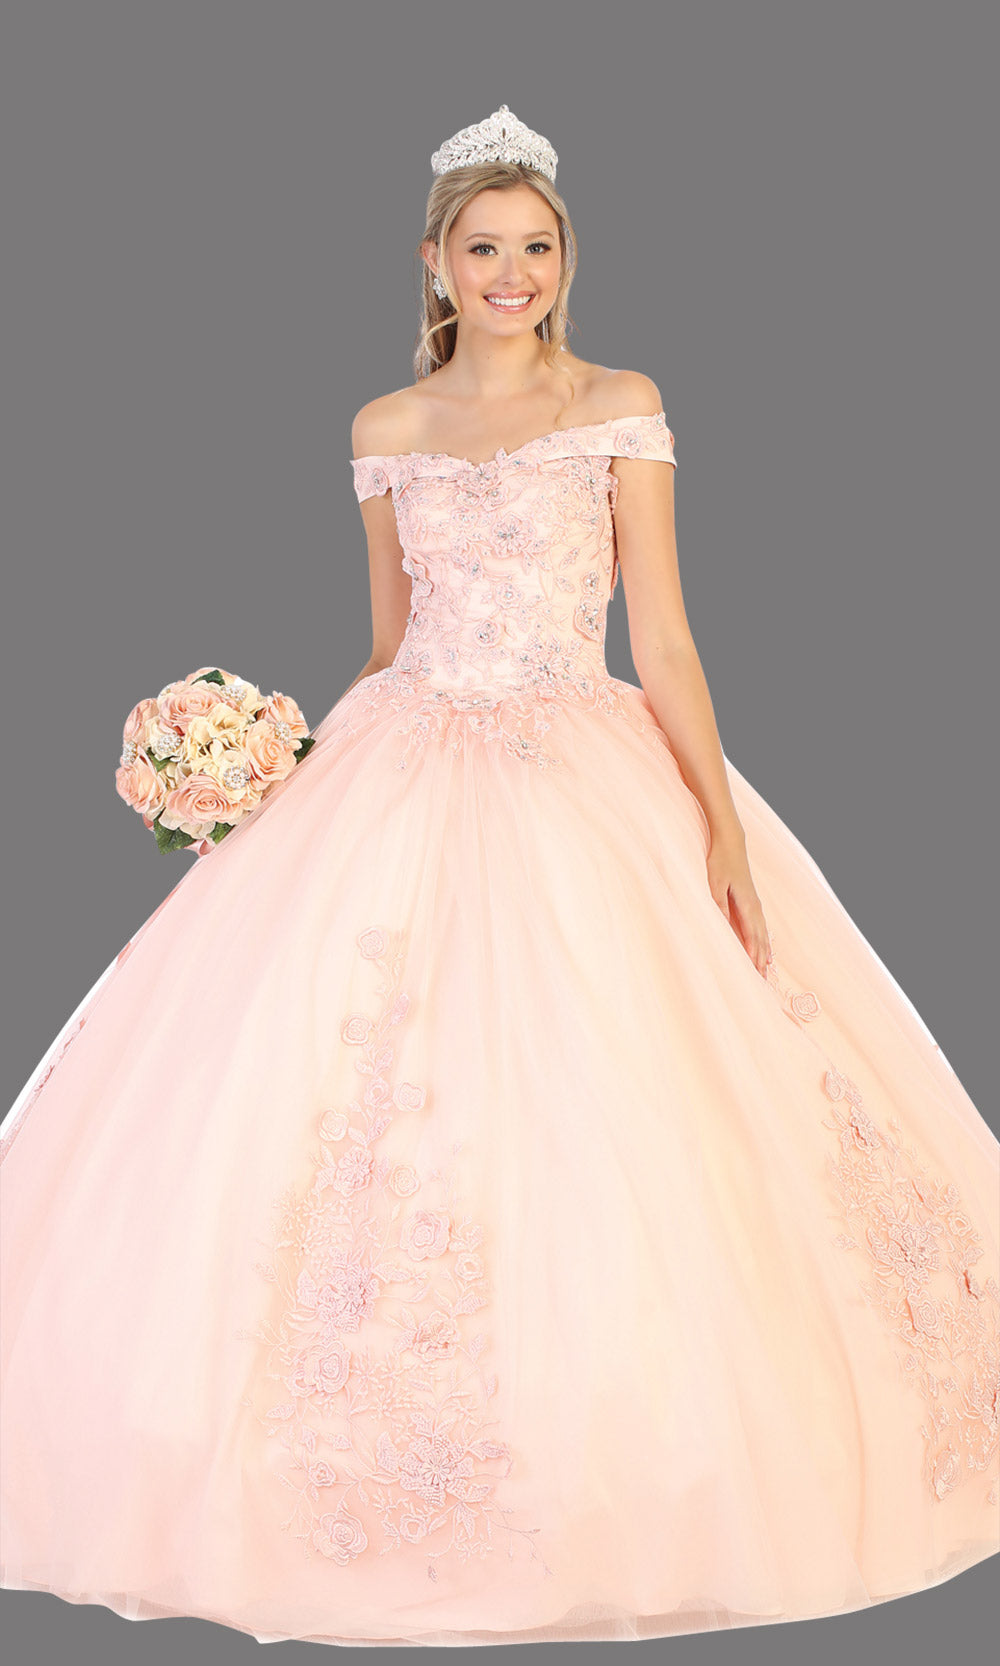 Mayqueen LK136 blush pink quinceanera off shoulder ball gown. Light pink sequin ball gown is perfect for engagement dress, wedding reception, indowestern party gown, sweet 16, debut, sweet 15, sweet 18. Plus sizes available for ballgowns.jpg